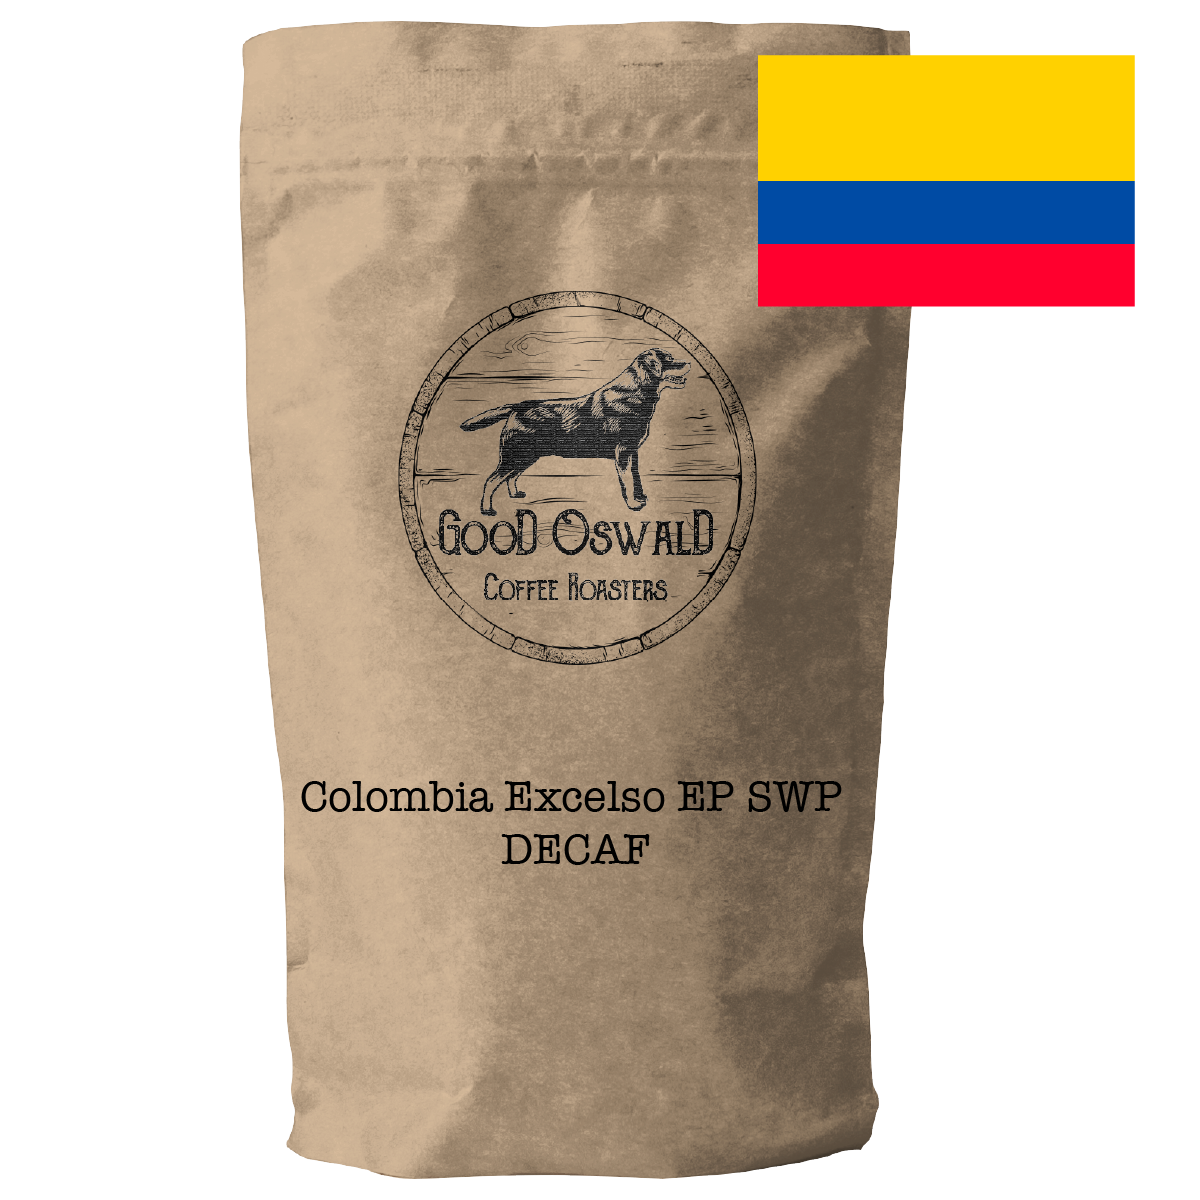 Colombia Excelso EP SWP DECAF